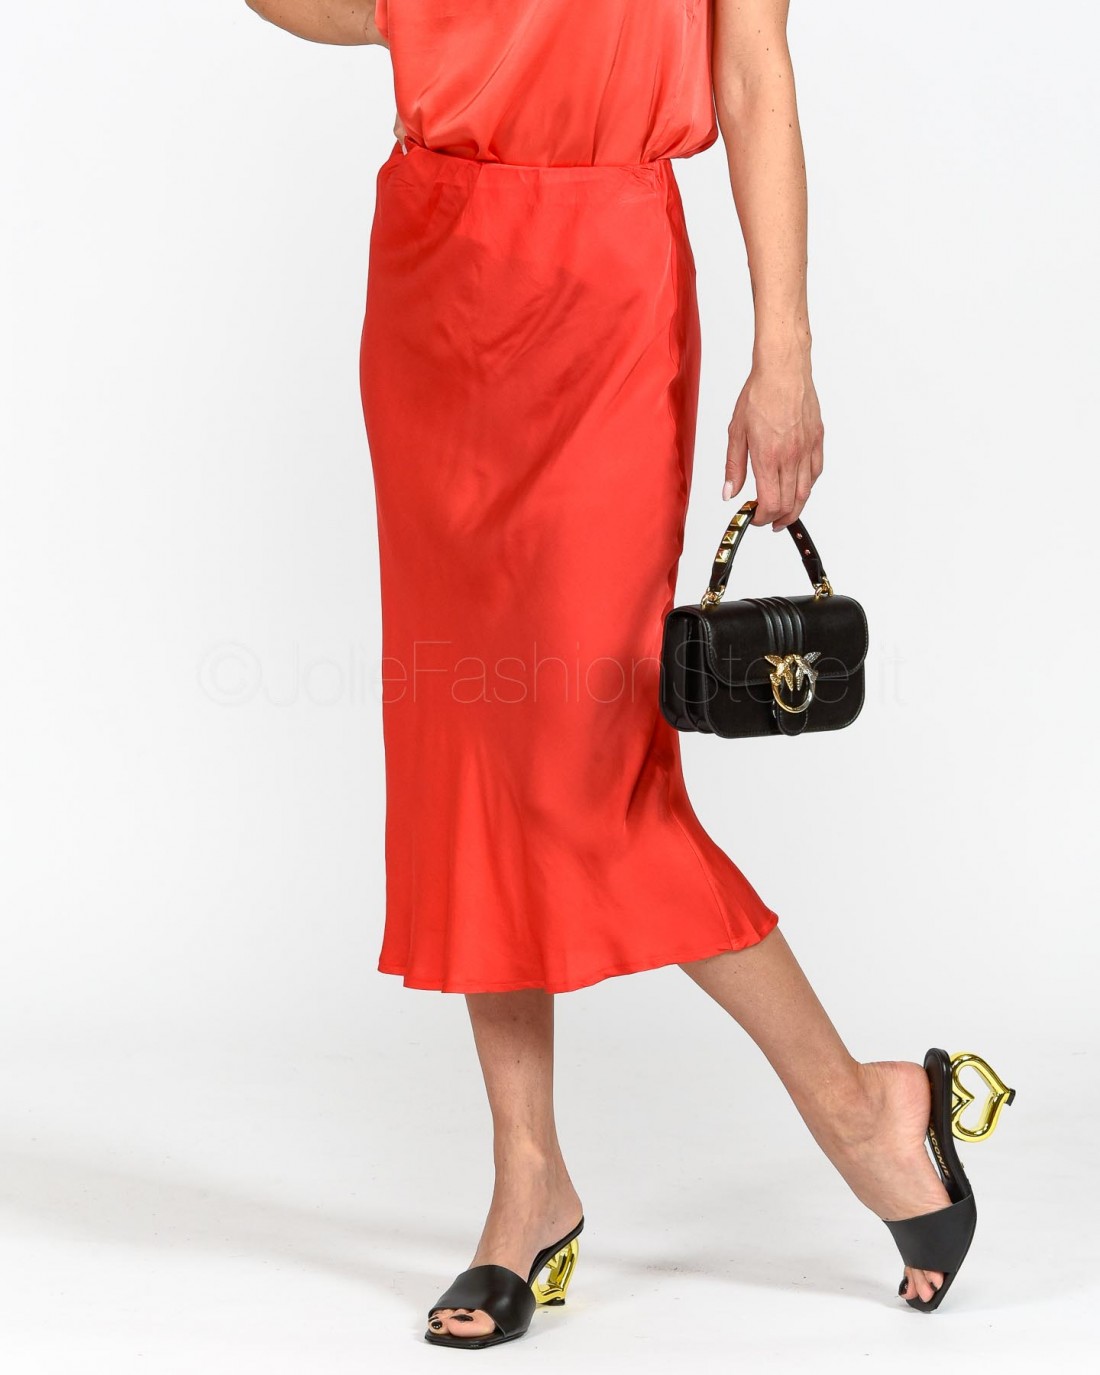 Anonyme Gonna Satin Rosso  P163SS140 RED